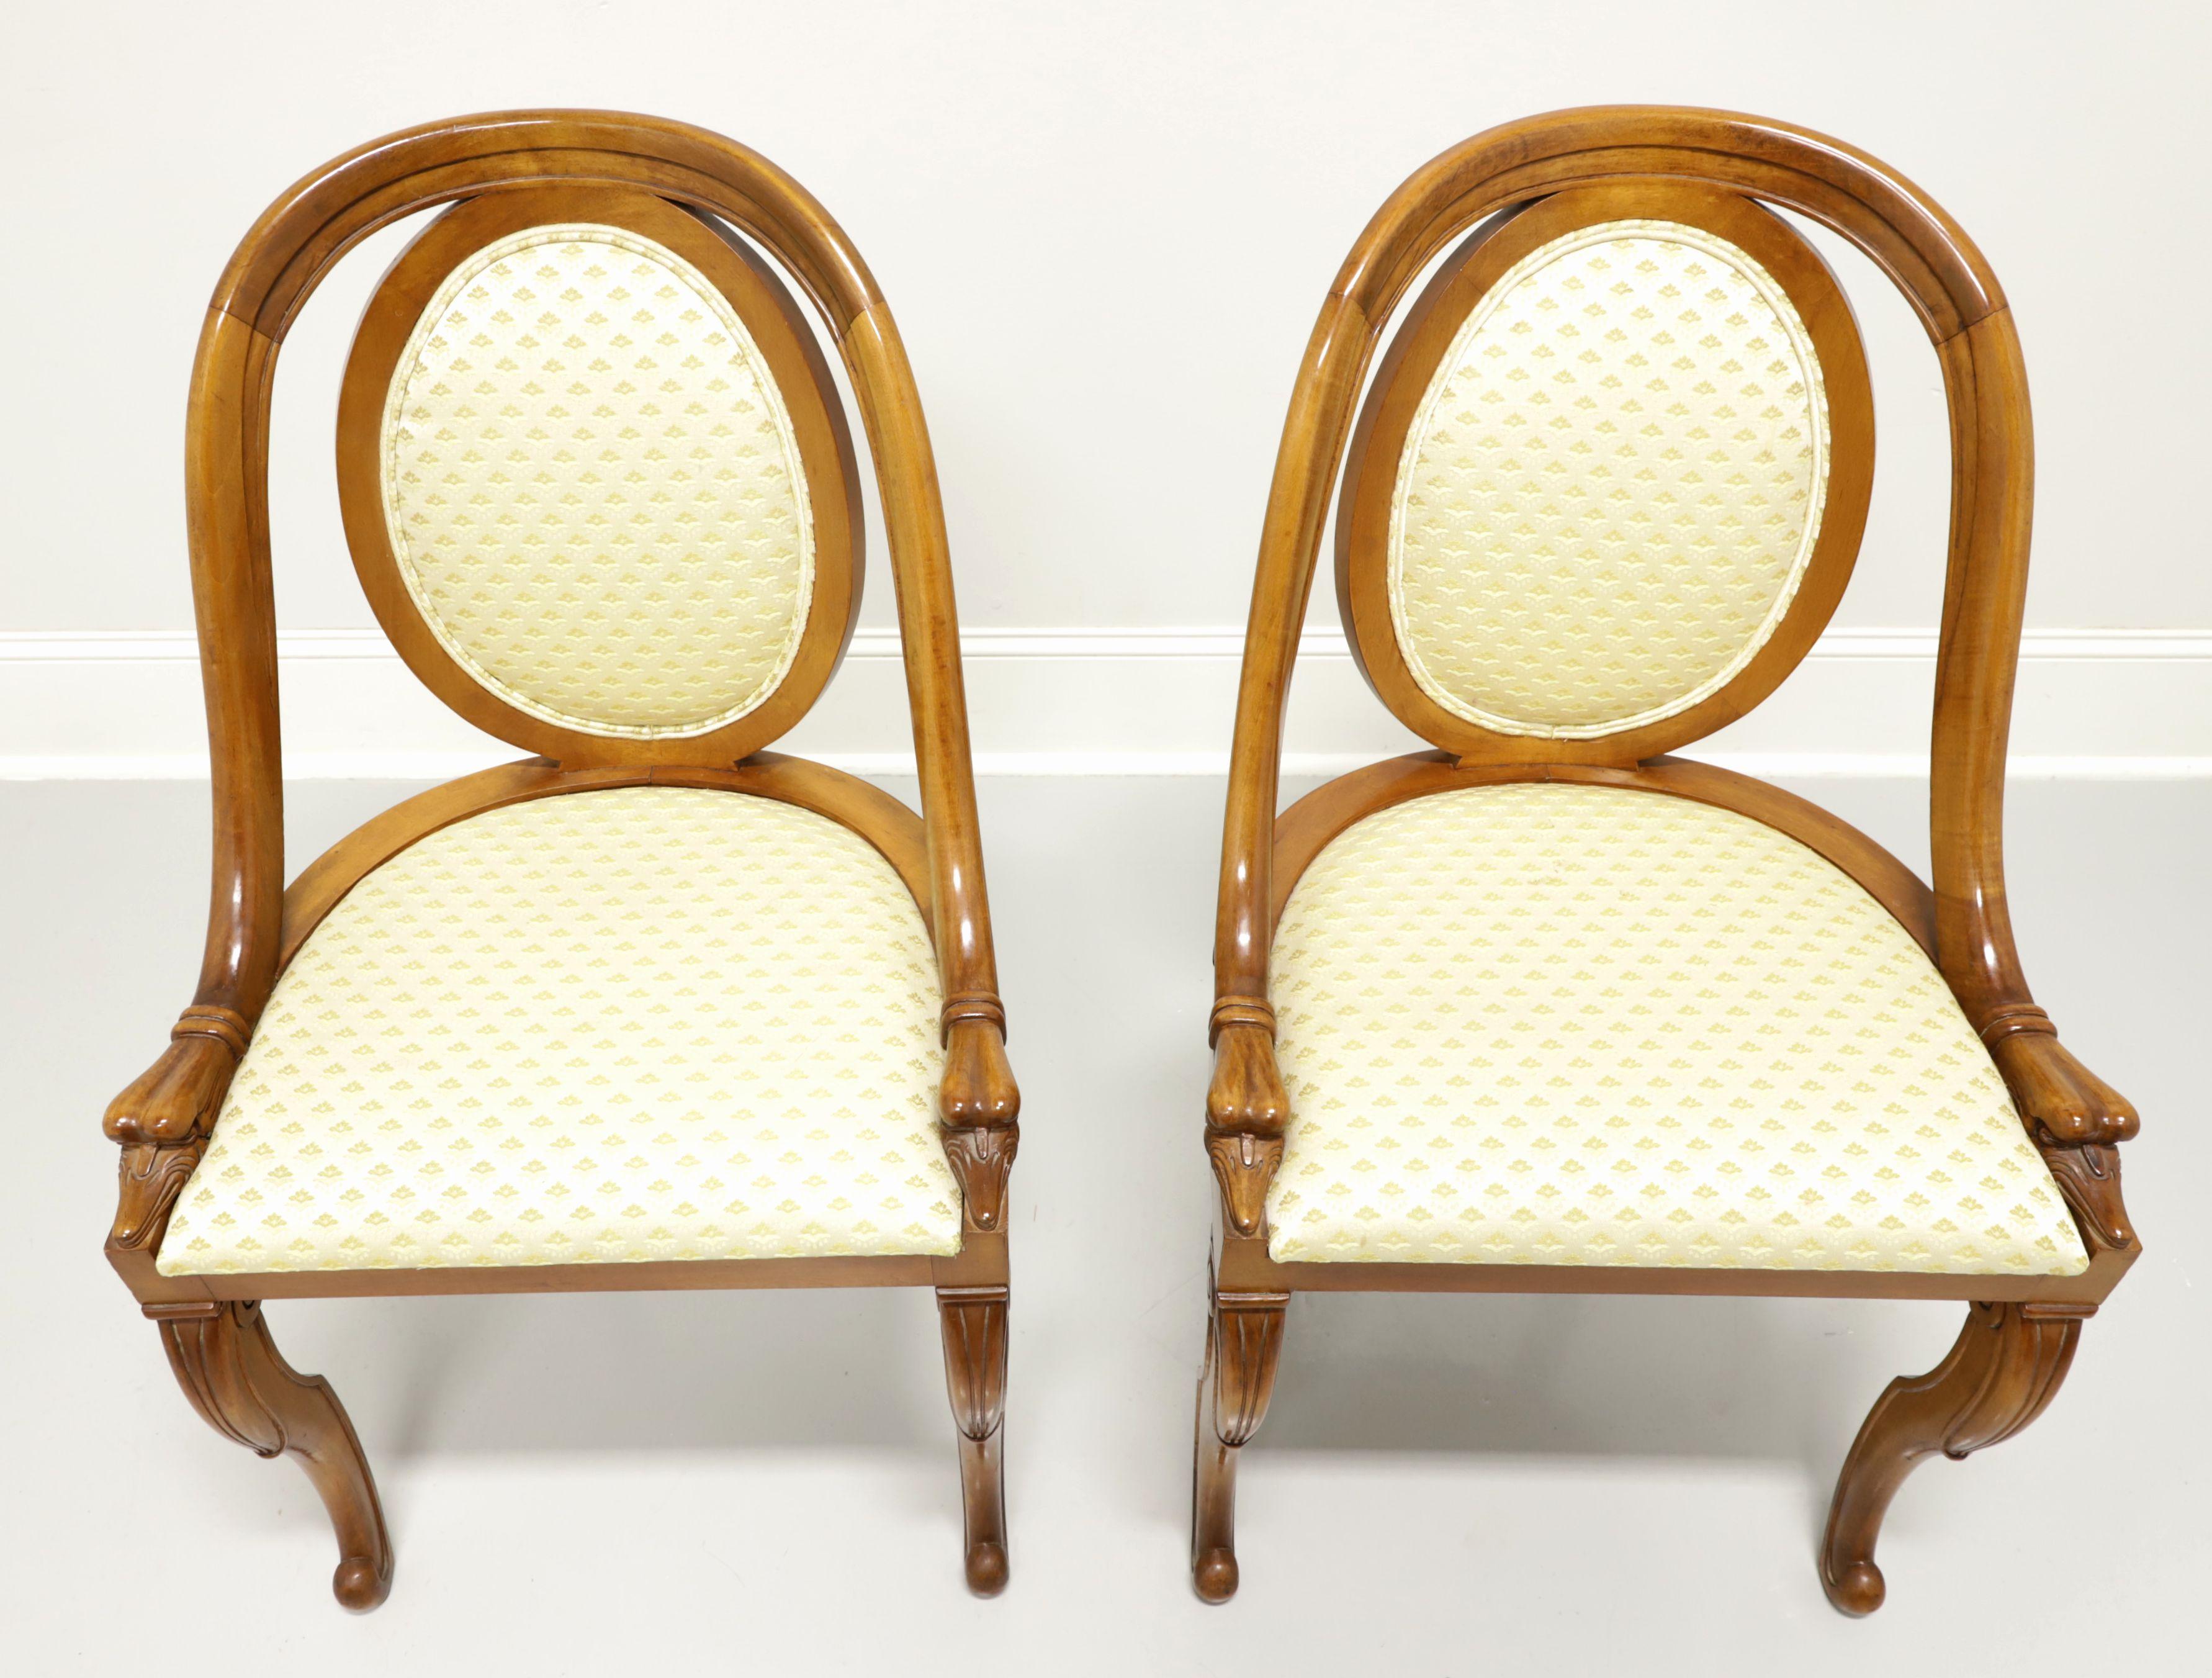 A pair of antique French Art Deco style dining side chairs, unbranded. Solid hardwood with a golden honey tone finish, rounded crestrail blending into curved stile ending with gooseheads at apron, yellow color fabric upholstered oval backrest,